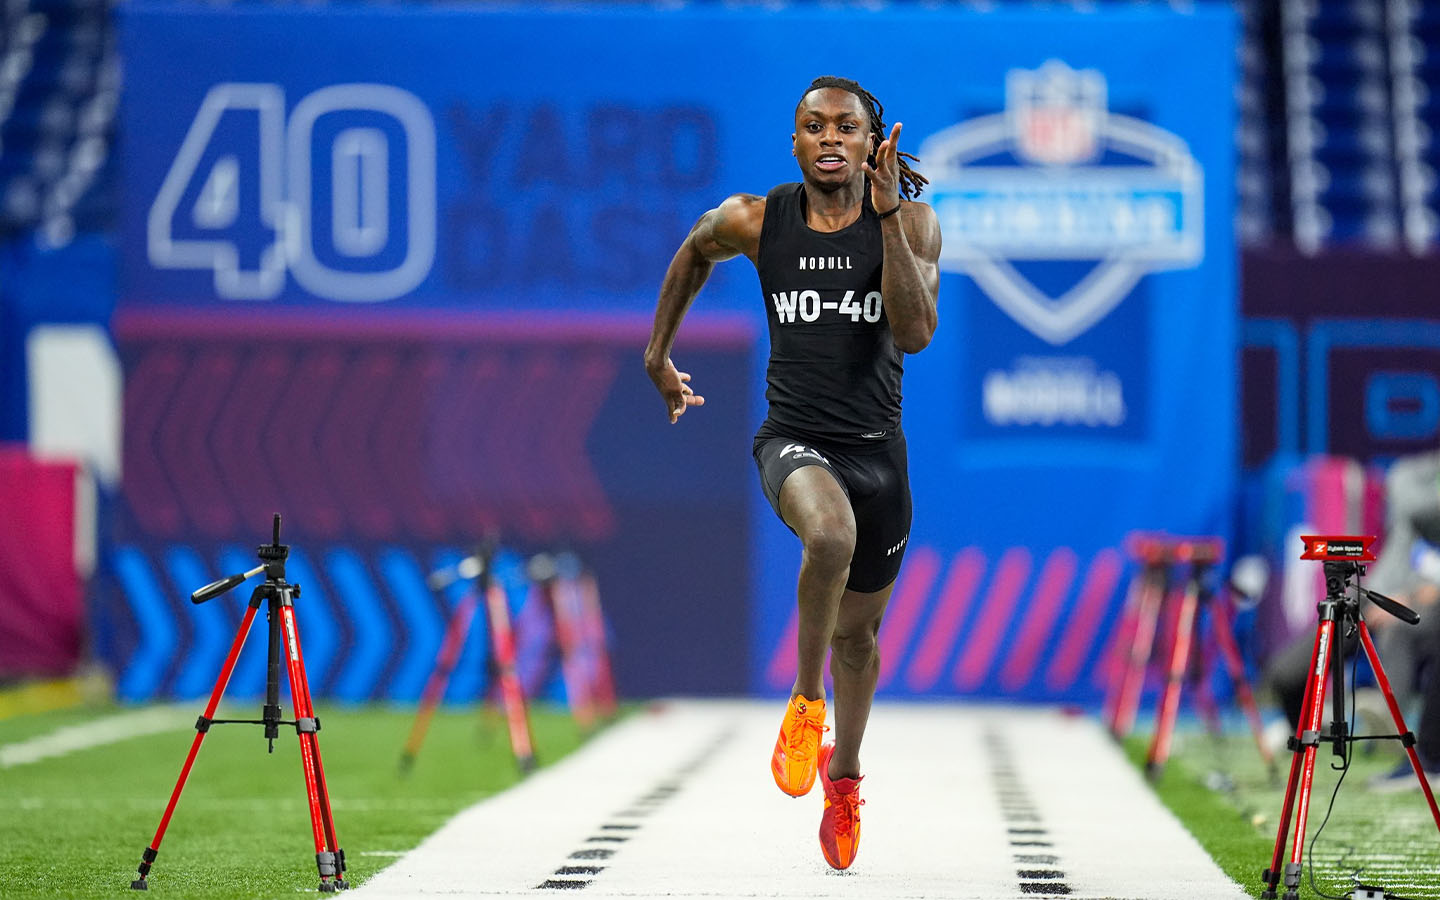 Who is Xavier Worthy, the college football player compared to Usain Bolt?